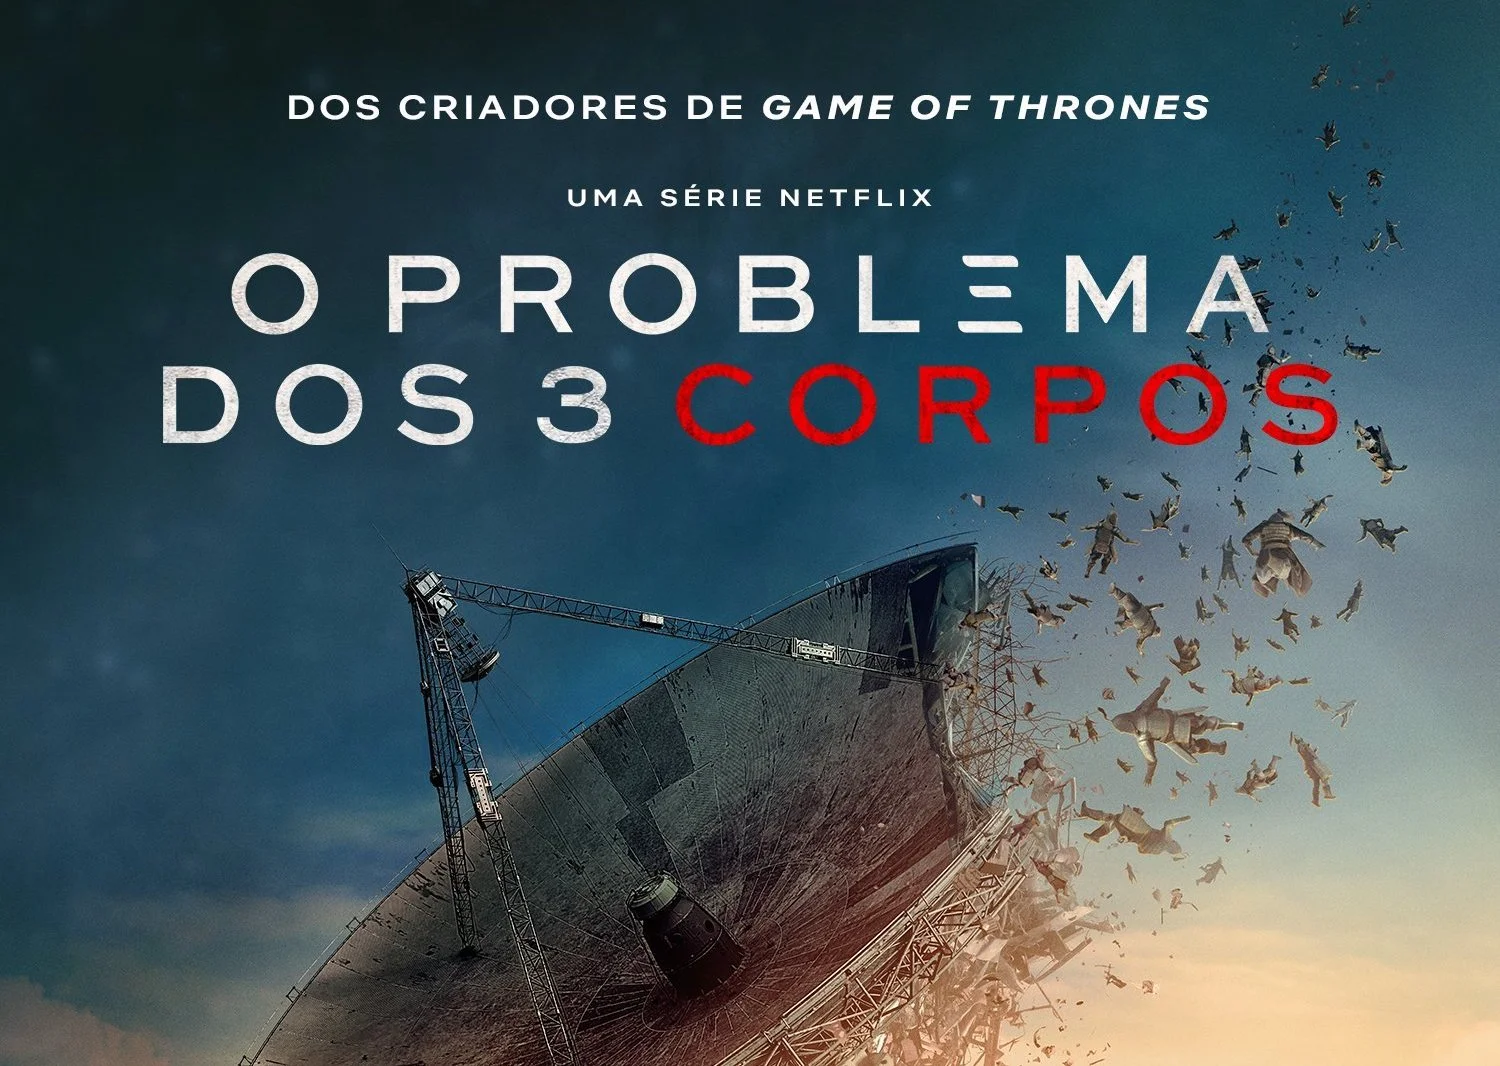 Netflix series promotional poster with a disintegrating ship, titled "O Problema dos 3 Corpos," from the creators of Game of Thrones.